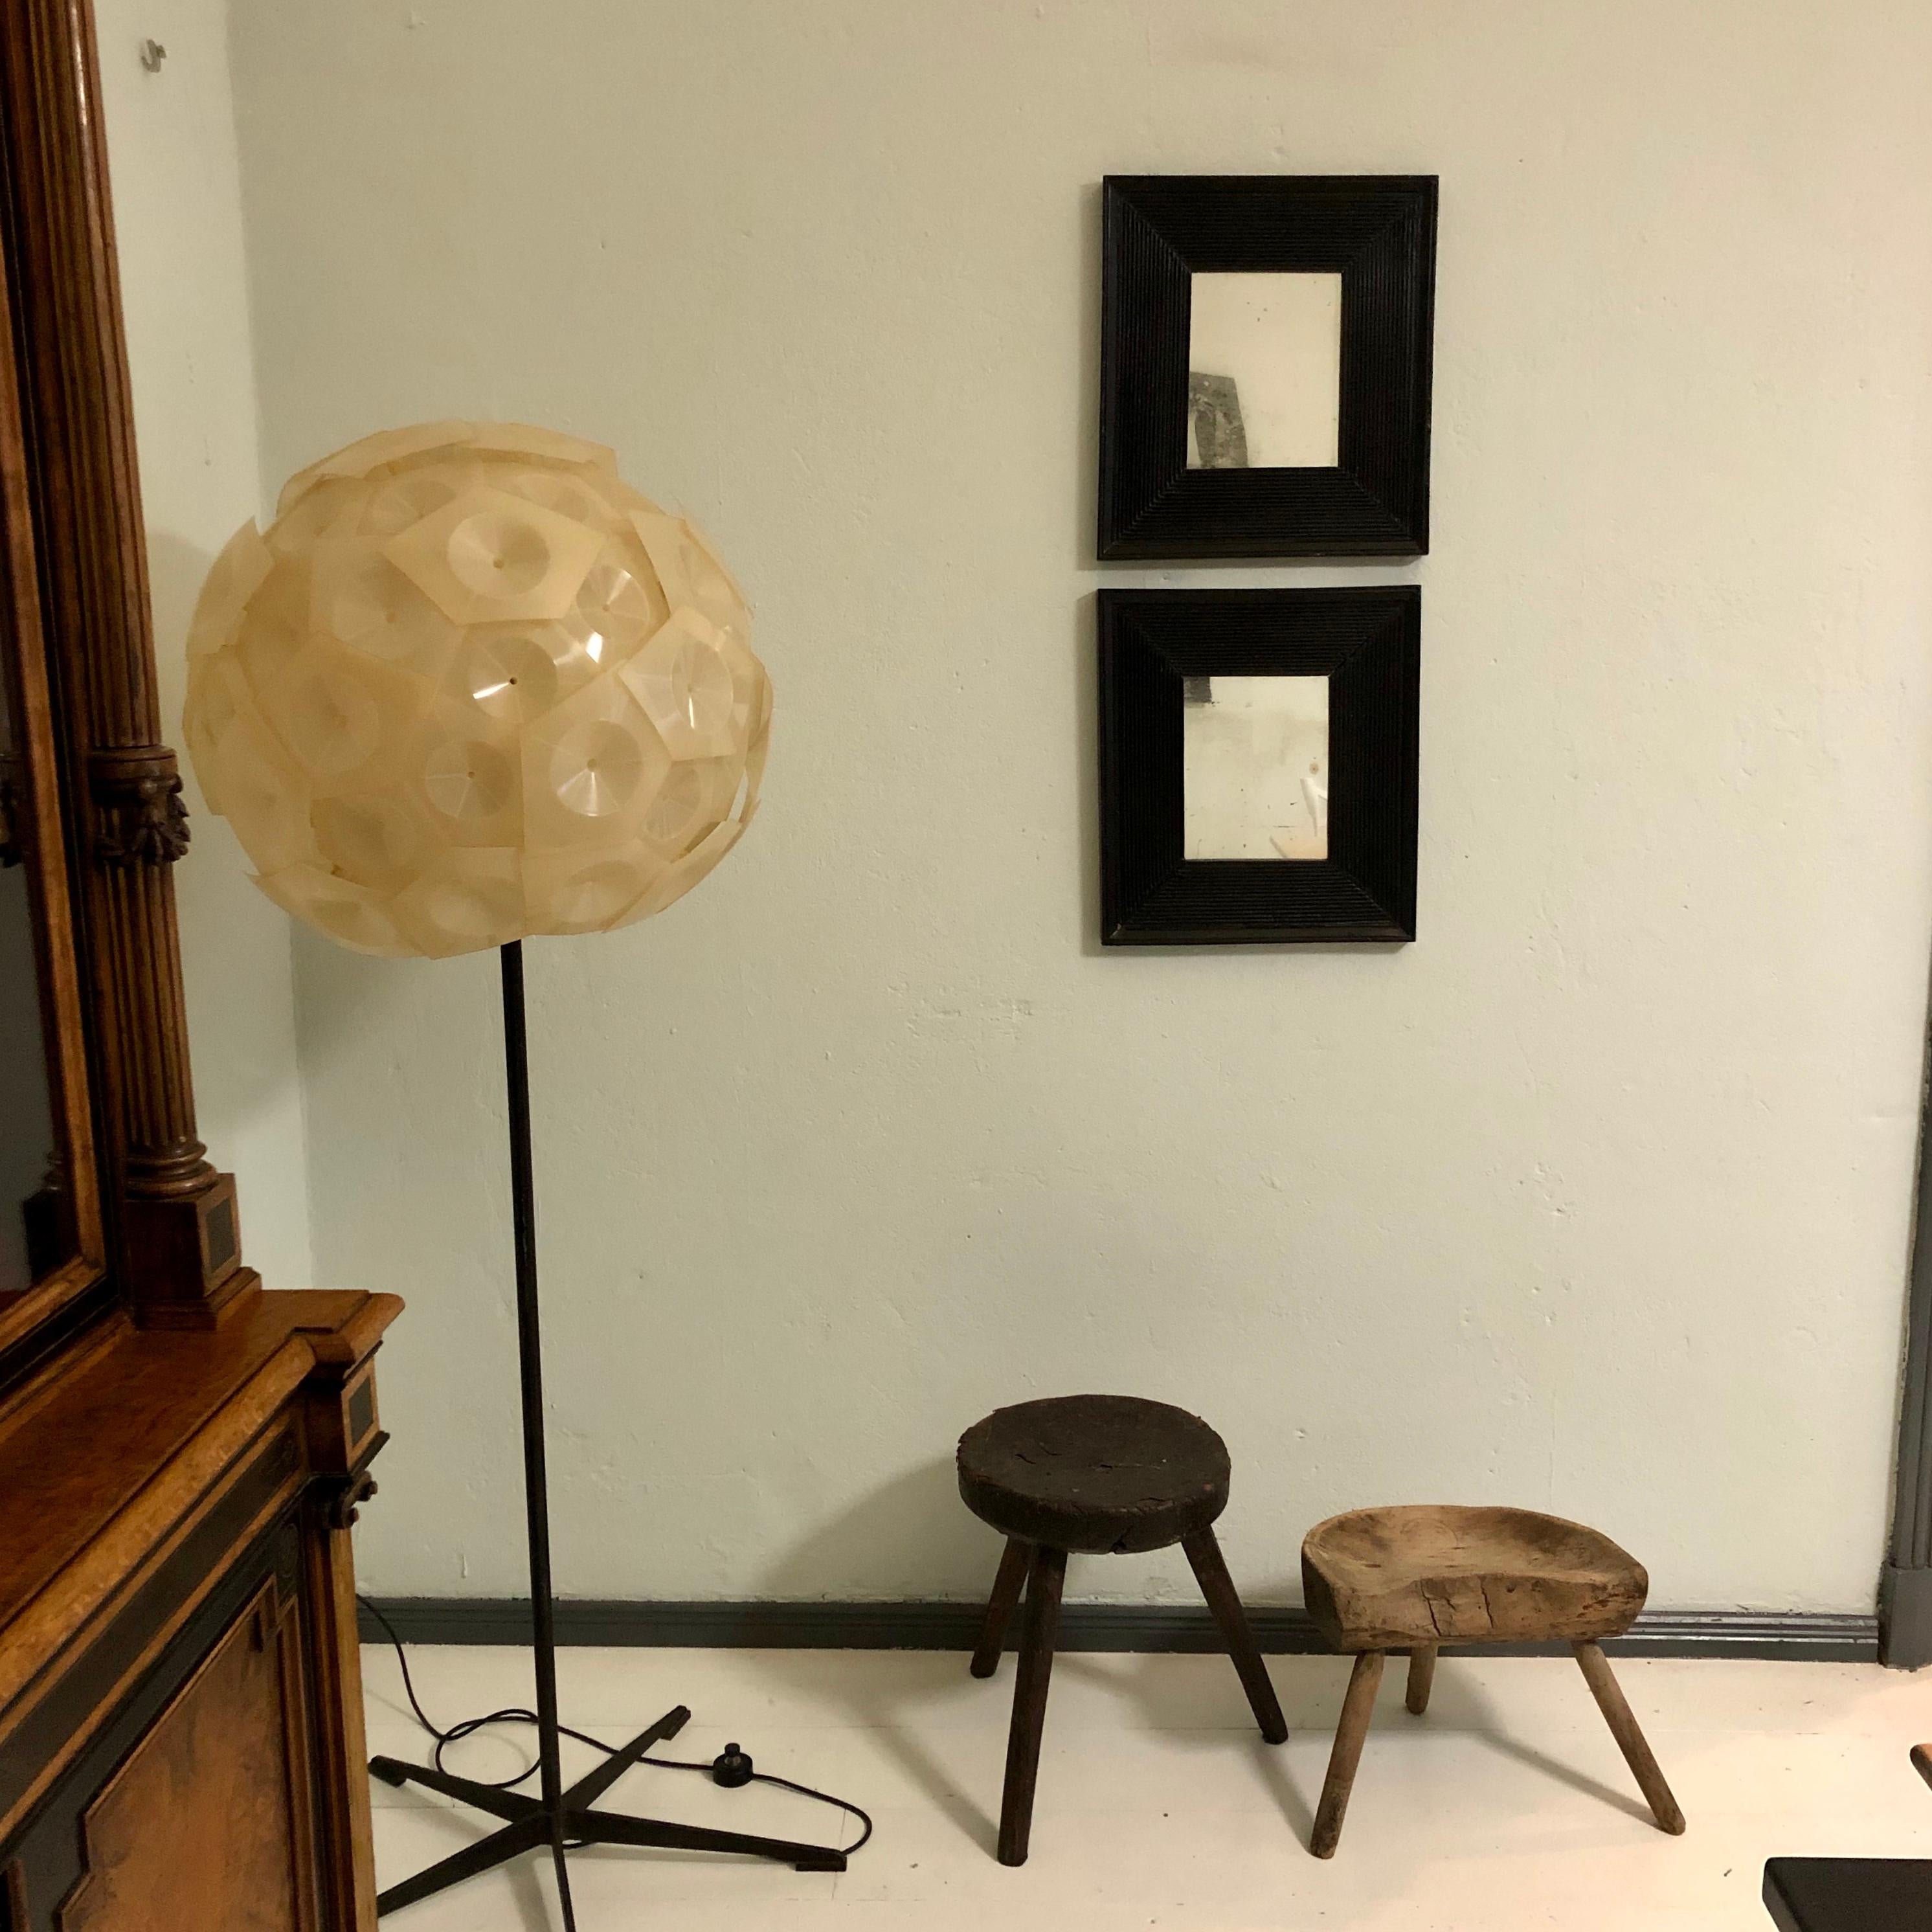 Beautiful pair of black mirrors, circa 1880.
The frame is made out of wood and ebonized. They still have the old mirror glass which gives them a great patina look.
Each mirror is: 40 cm x 46 cm.
A unique piece which is a great eye-catcher for your